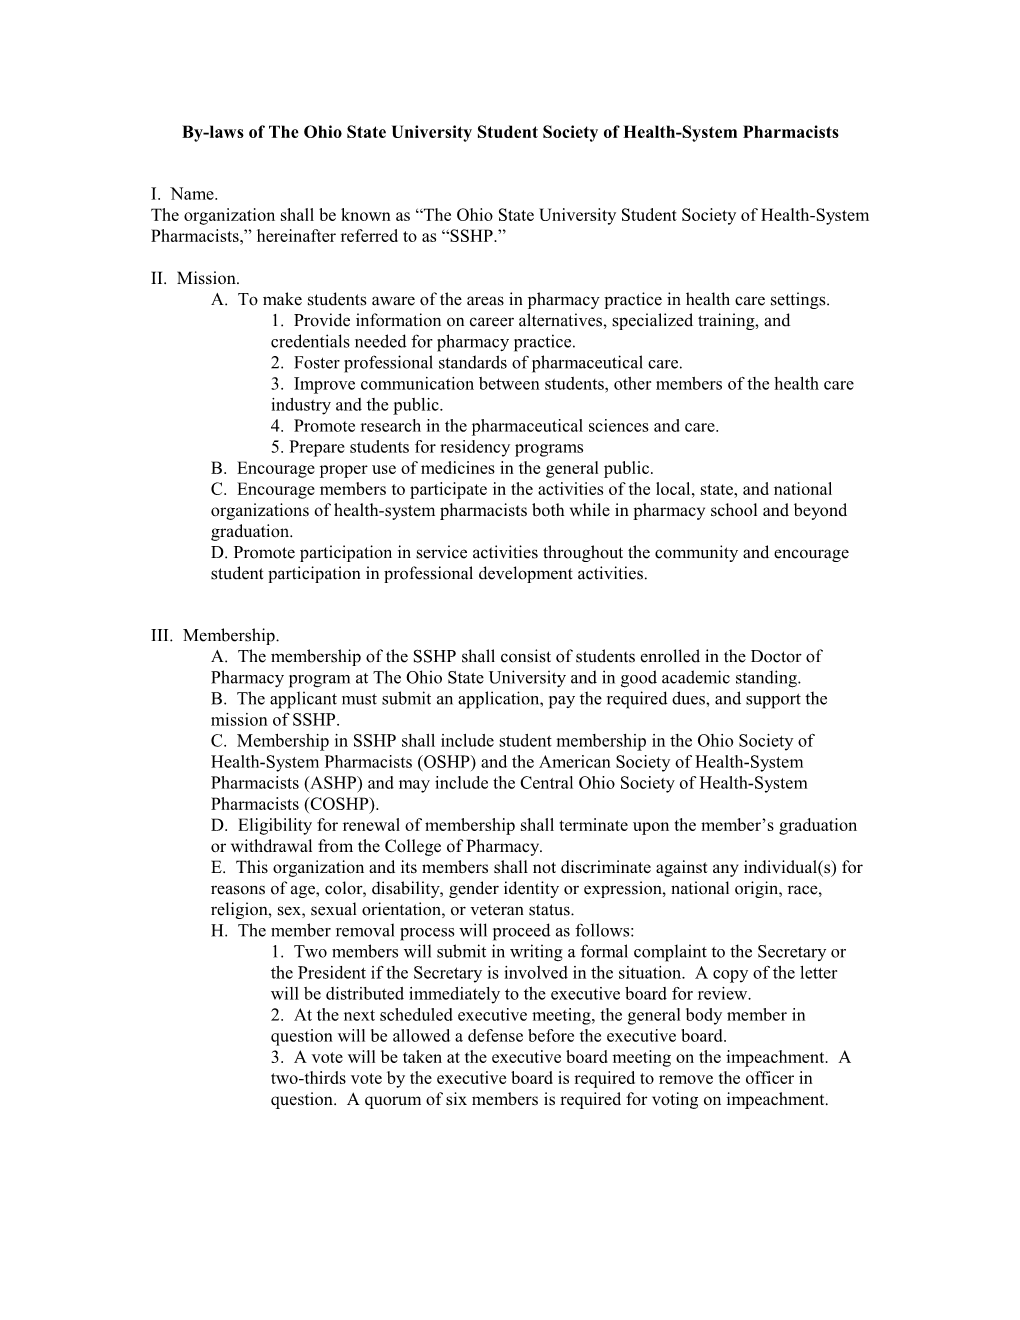 By-Laws of the Ohio State University Student Society of Health-System Pharmacists